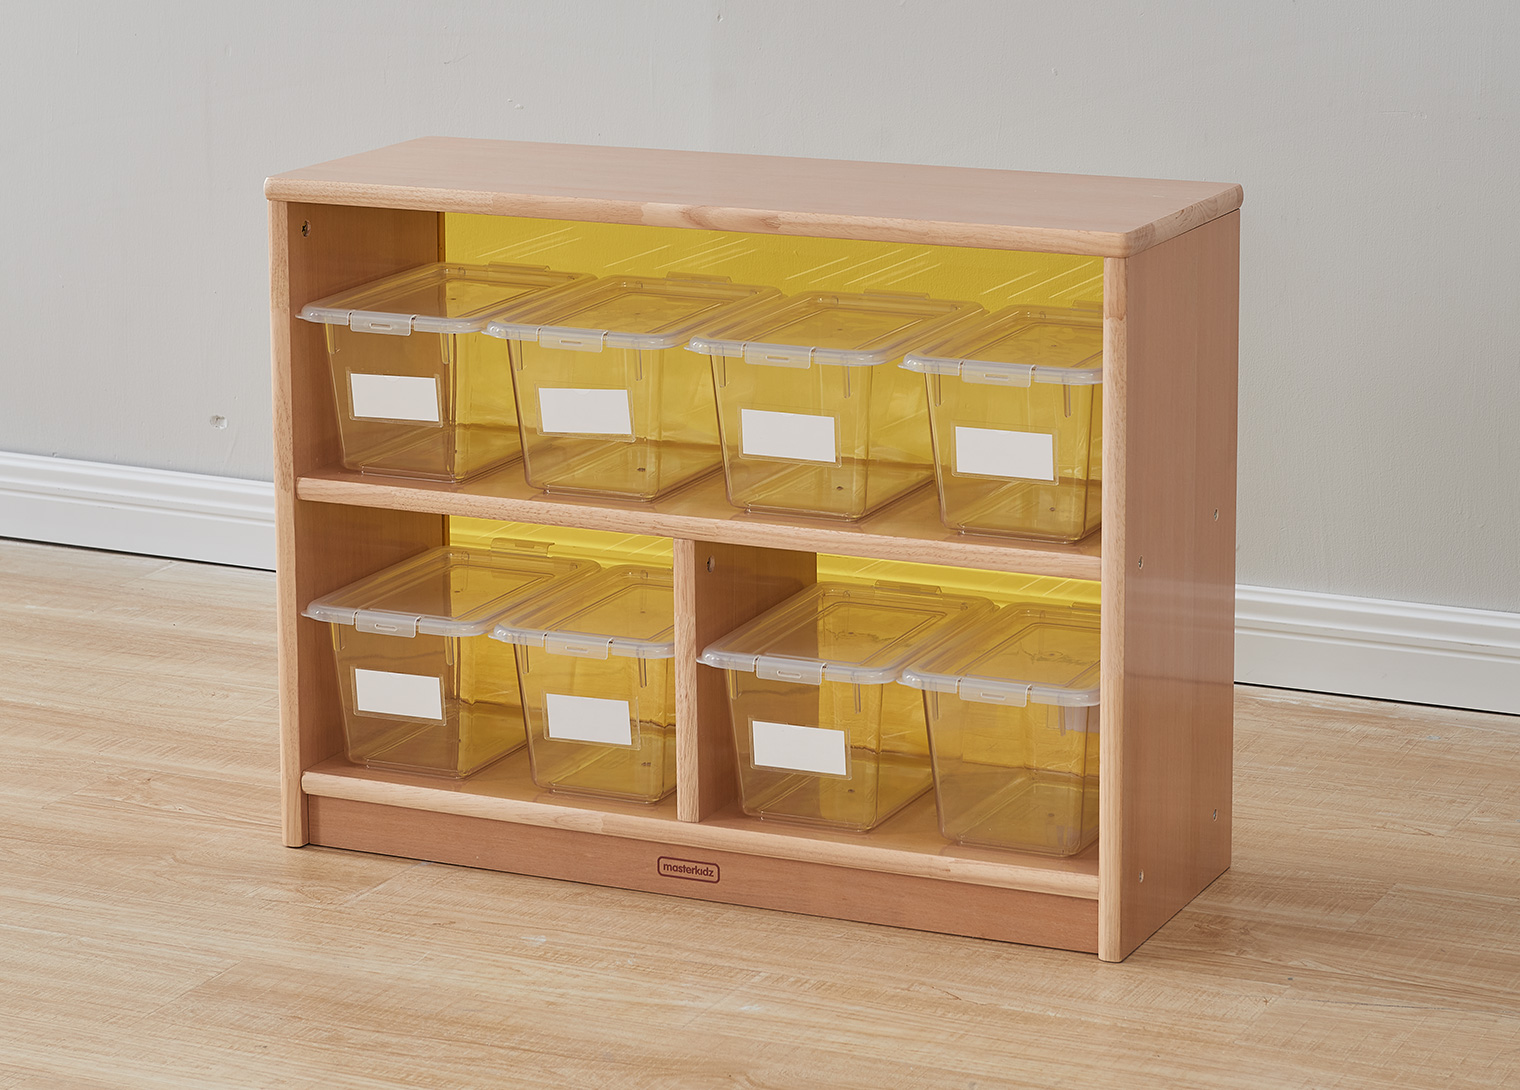 Forest School - 609H x 810L Wooden  3-Compartment Shelving Unit - Translucent Yellow Back